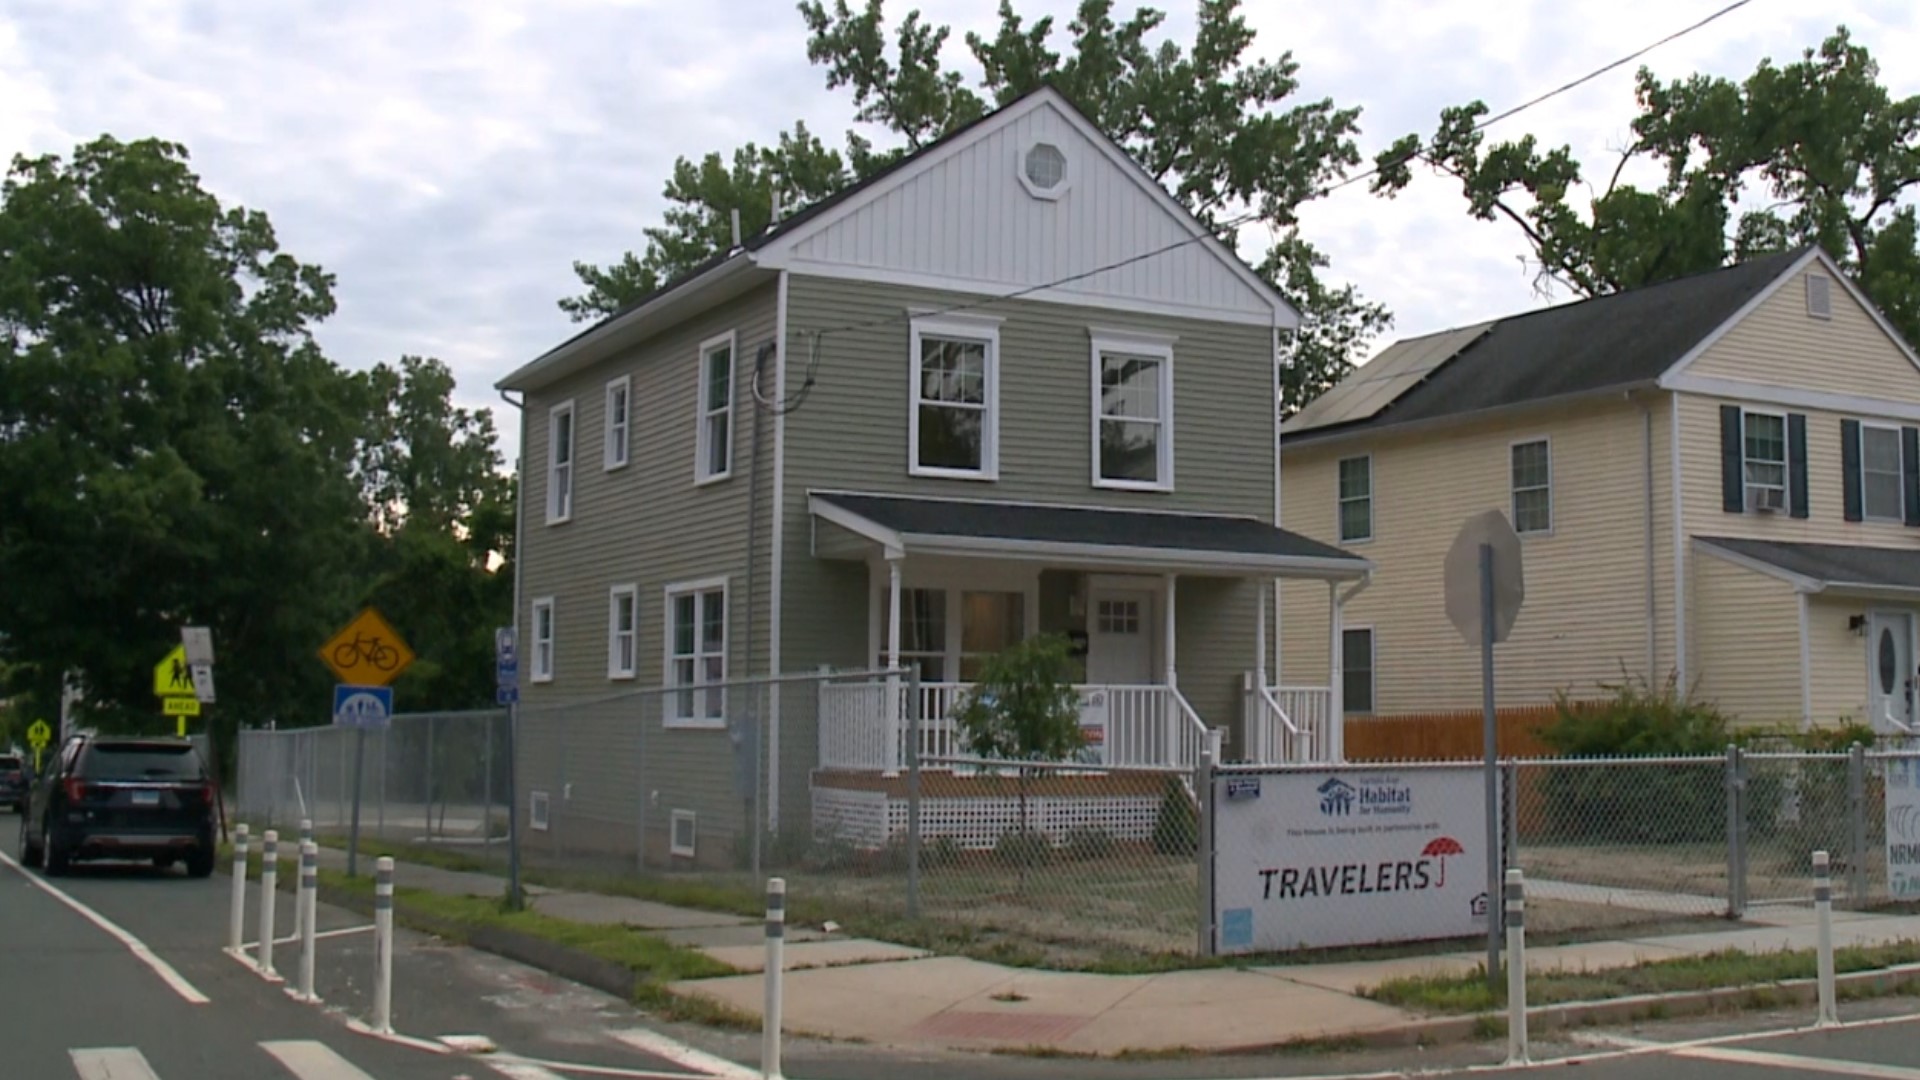 A single mom received a home from Habitat for Humanity in Hartford's north end.